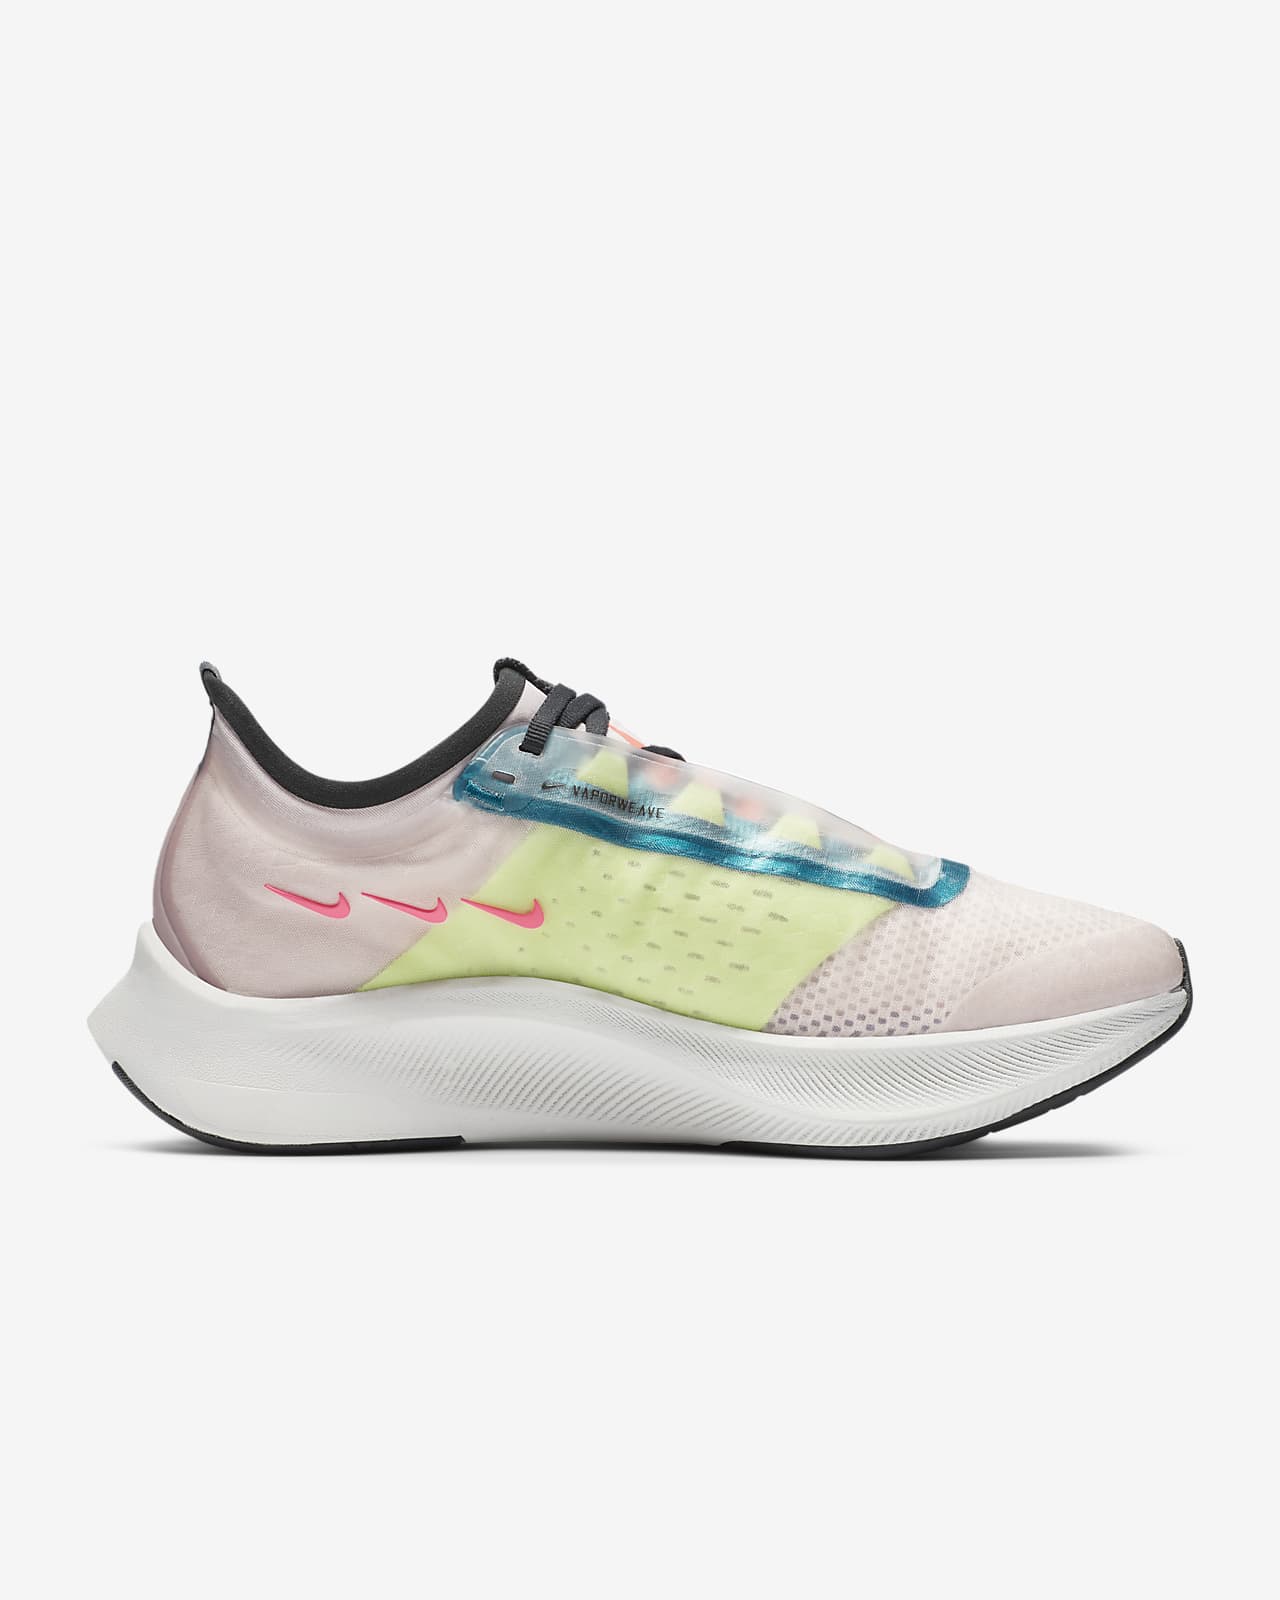 nike zoom fly 3 womens review